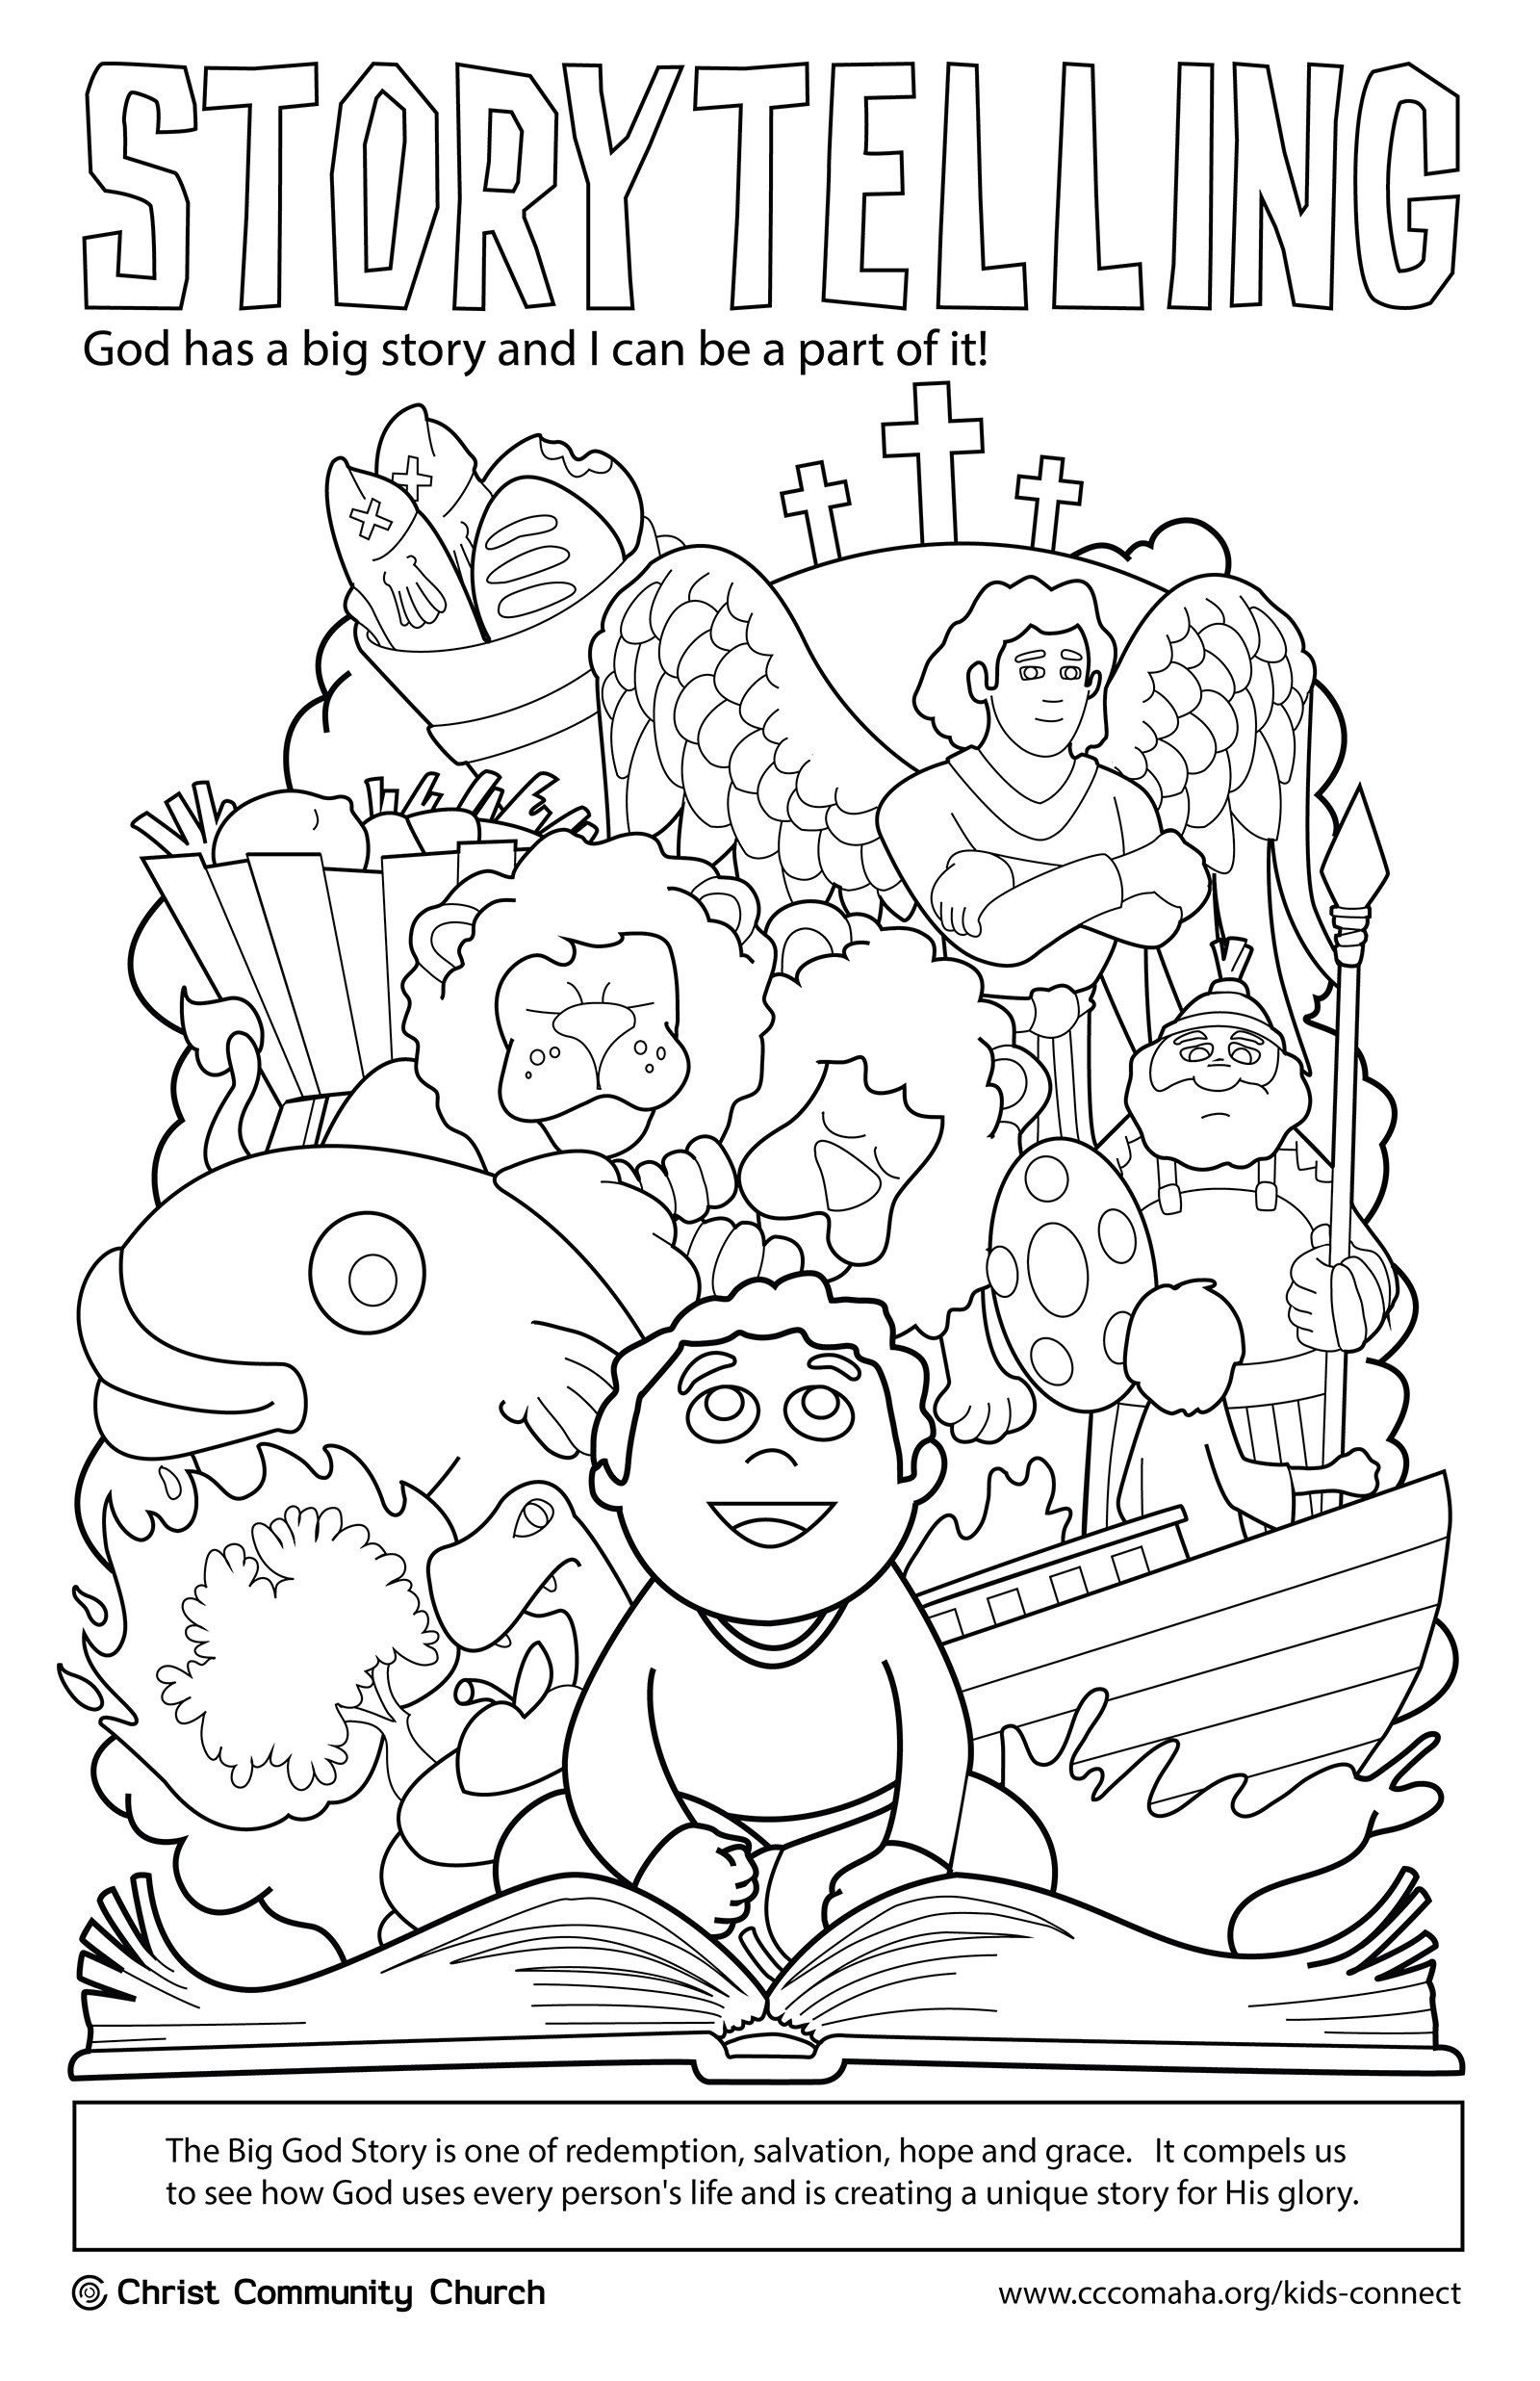 Kids Coloring Activities
 Greg Nunamaker Kids Coloring Pages